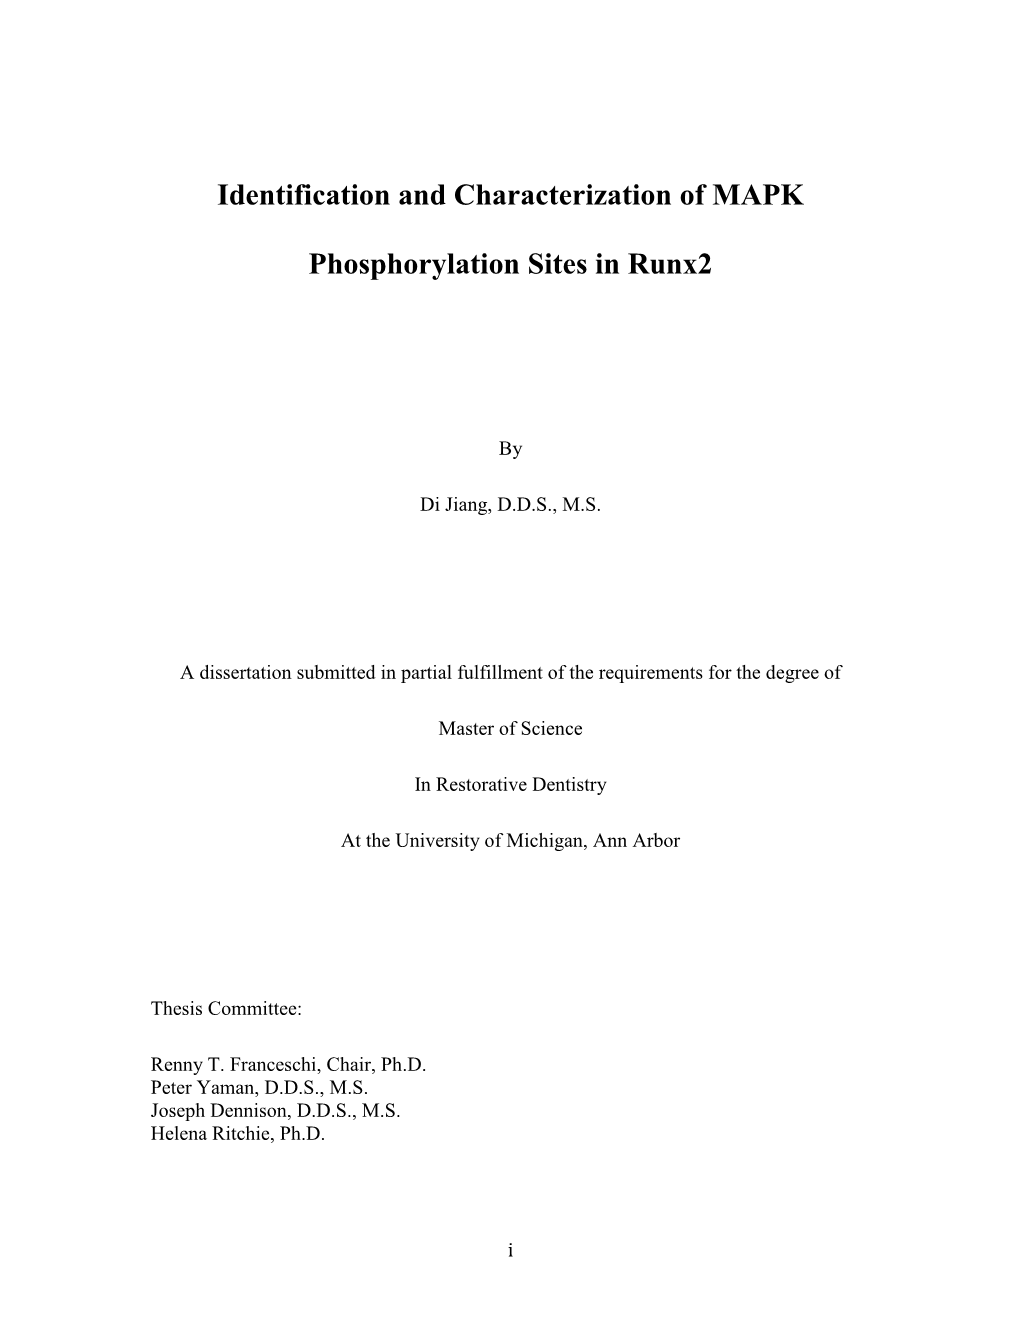 Identification and Characterization of MAPK Phosphorylation Sites In